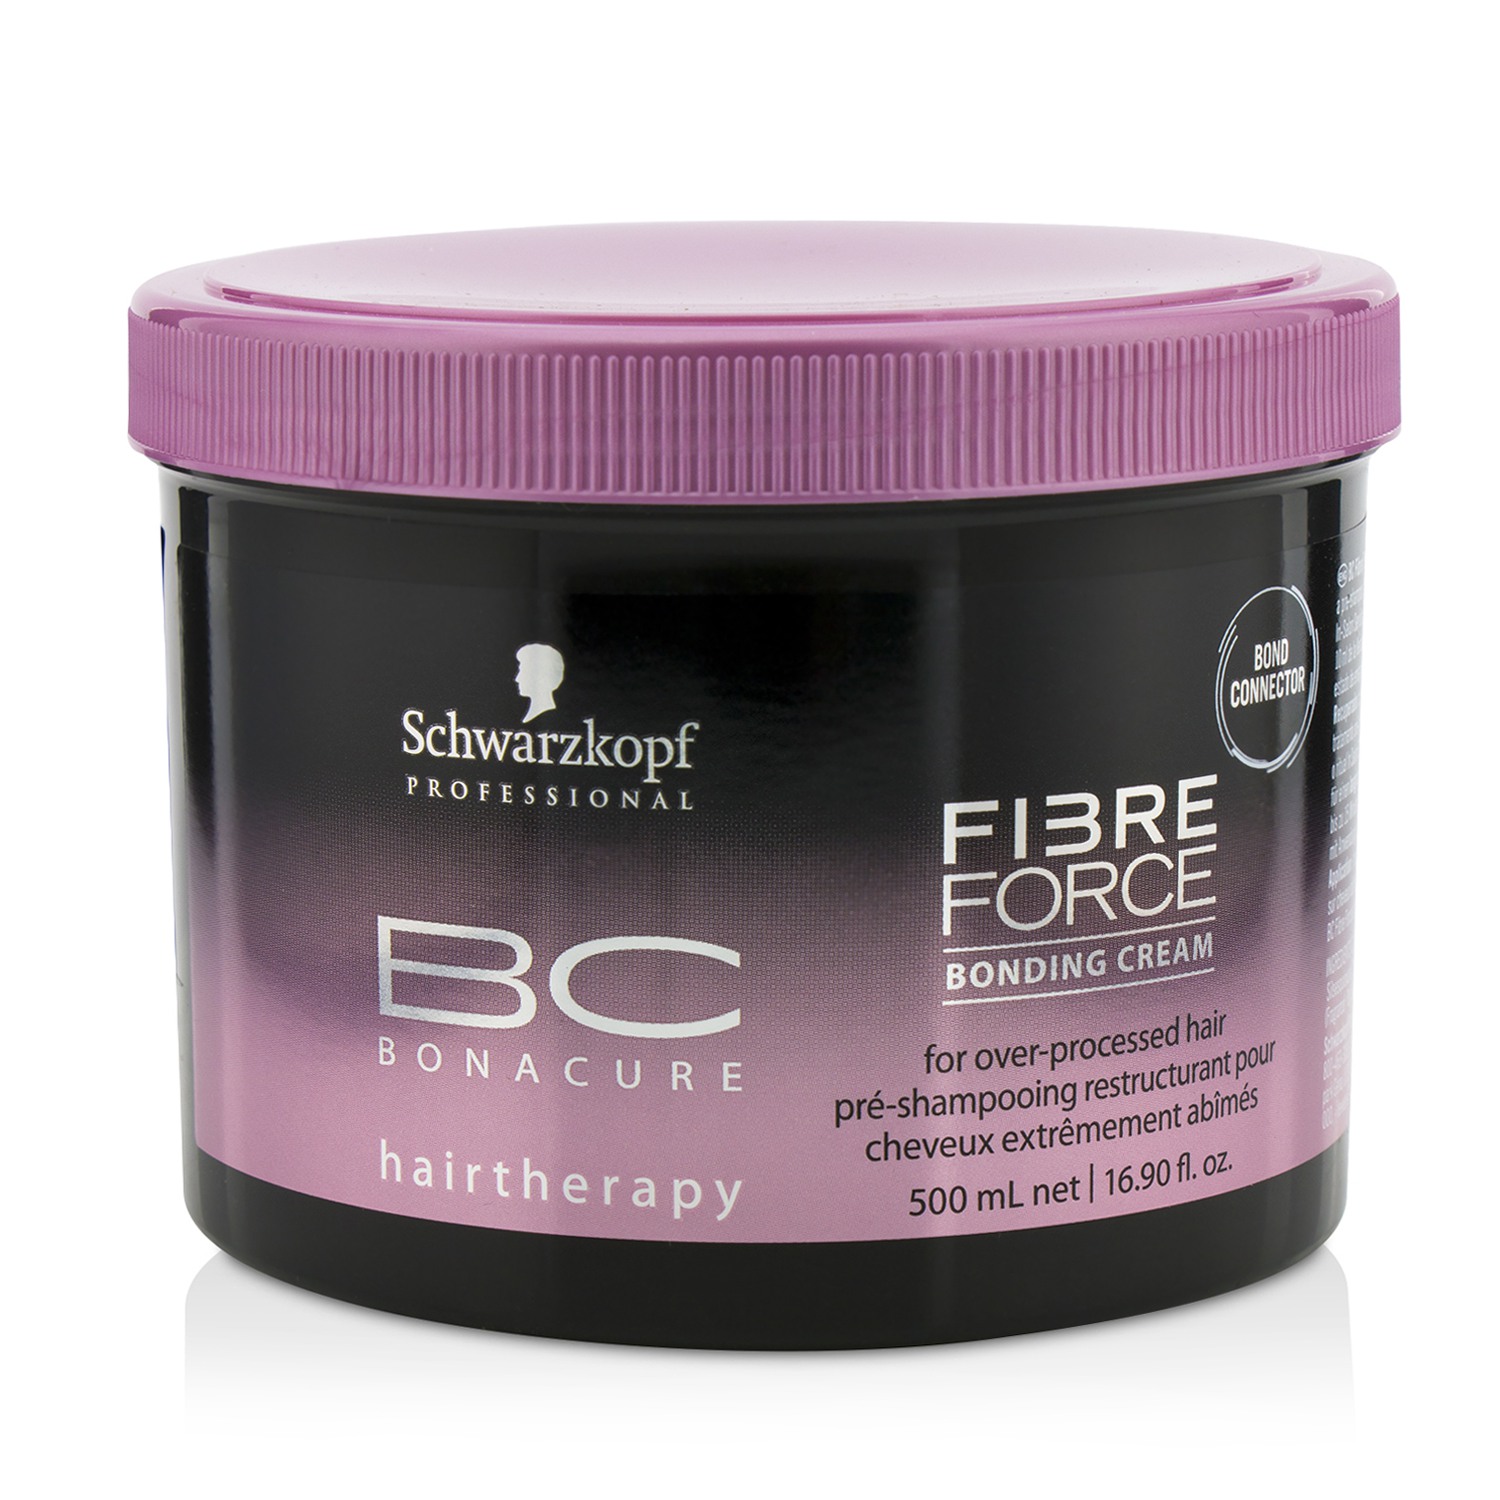 BC Fibre Force Bonding Cream (For Over-Processed Hair) Schwarzkopf Image